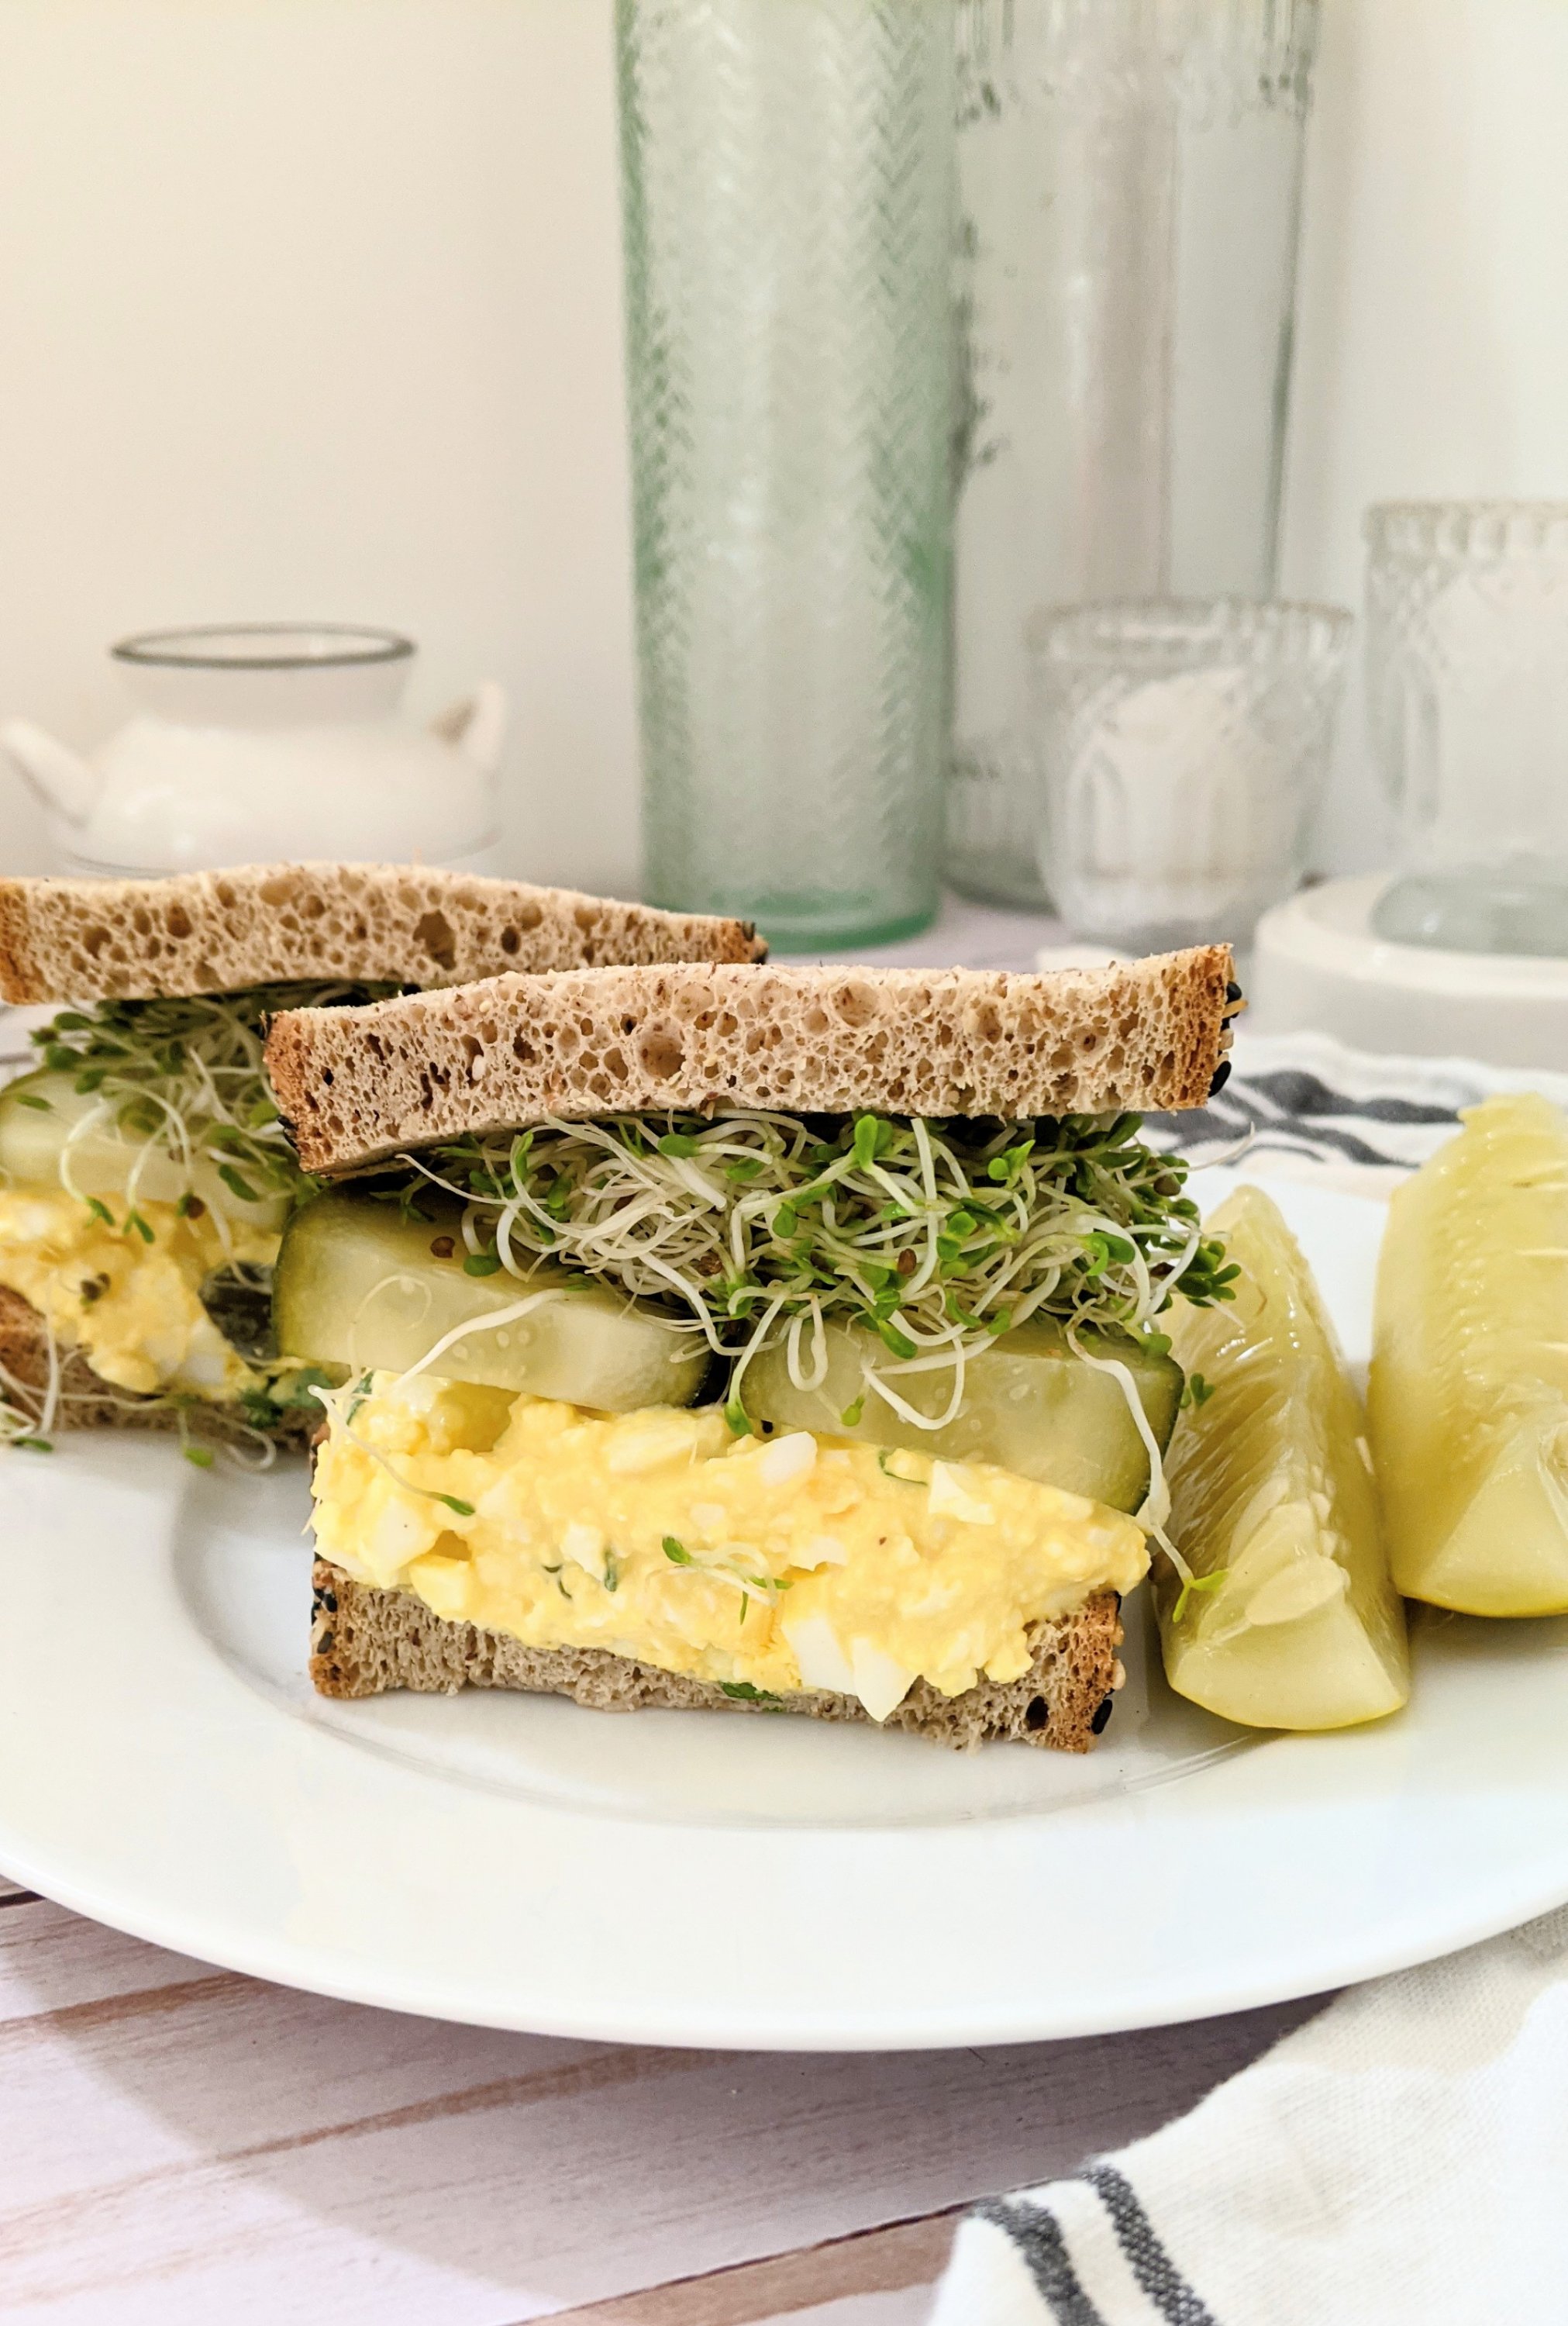 vegetarian keto egg salad recipes with dill pickles egg salad keto low carb pickles for egg salad with cucumbers and sprouts healthy low carb sandwich bread for egg salad sandwiches and lunches on the go